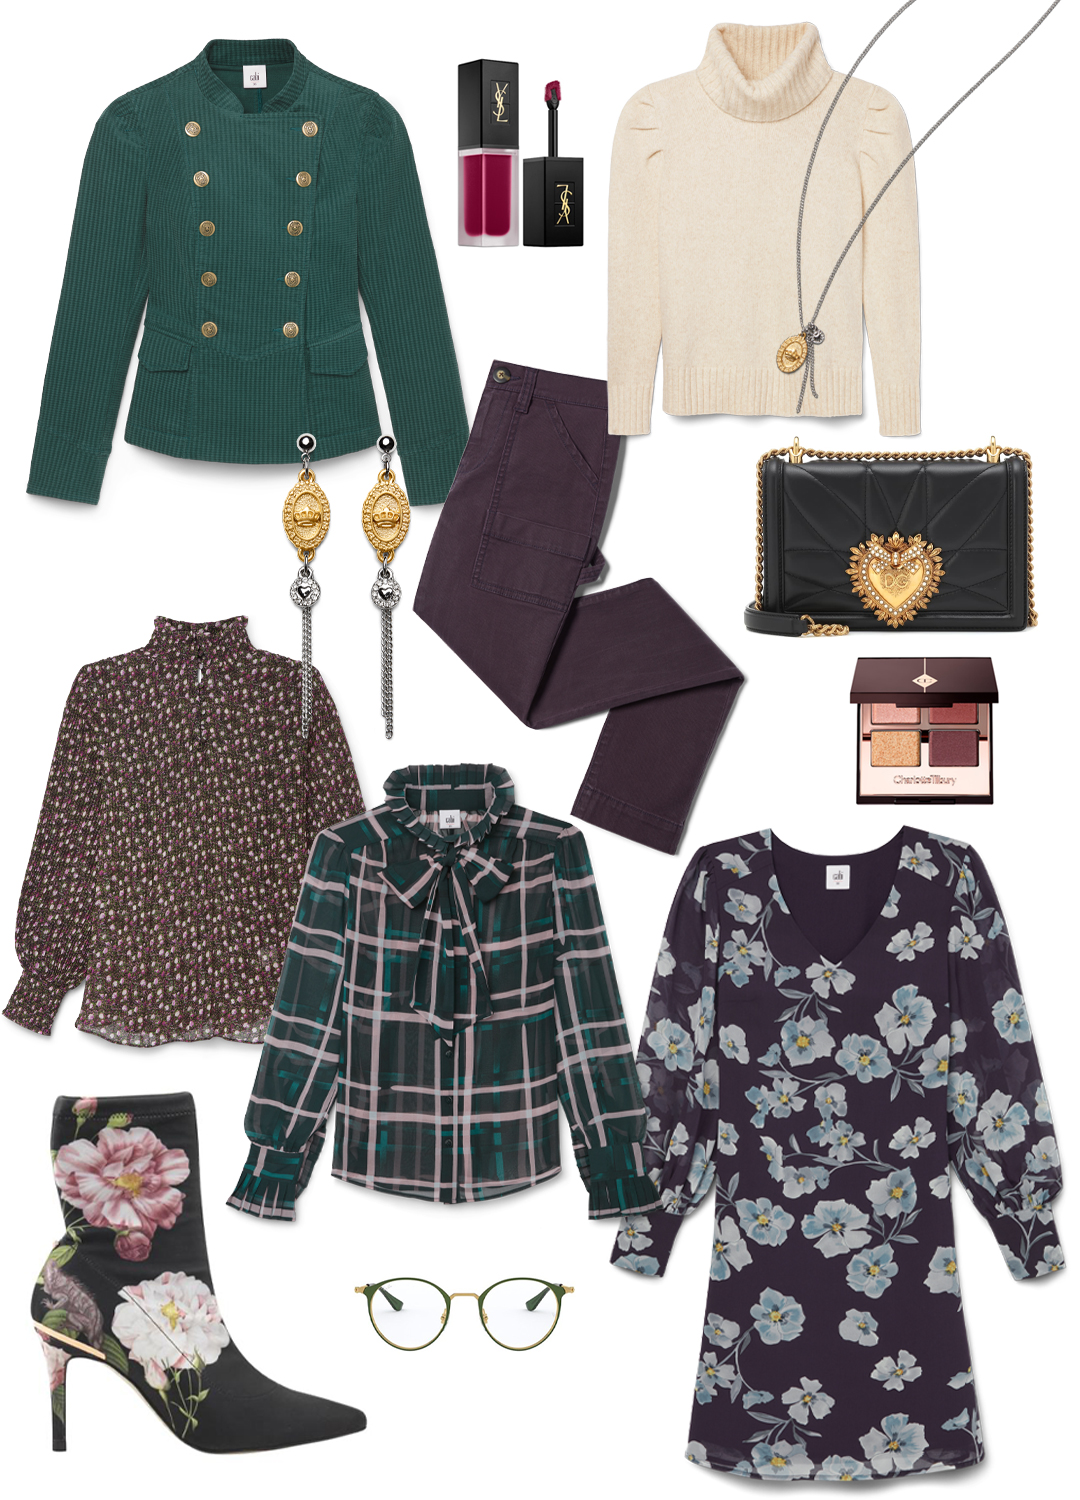 cabi Clothing | Fall 2020 | Romantic Outfit Trend